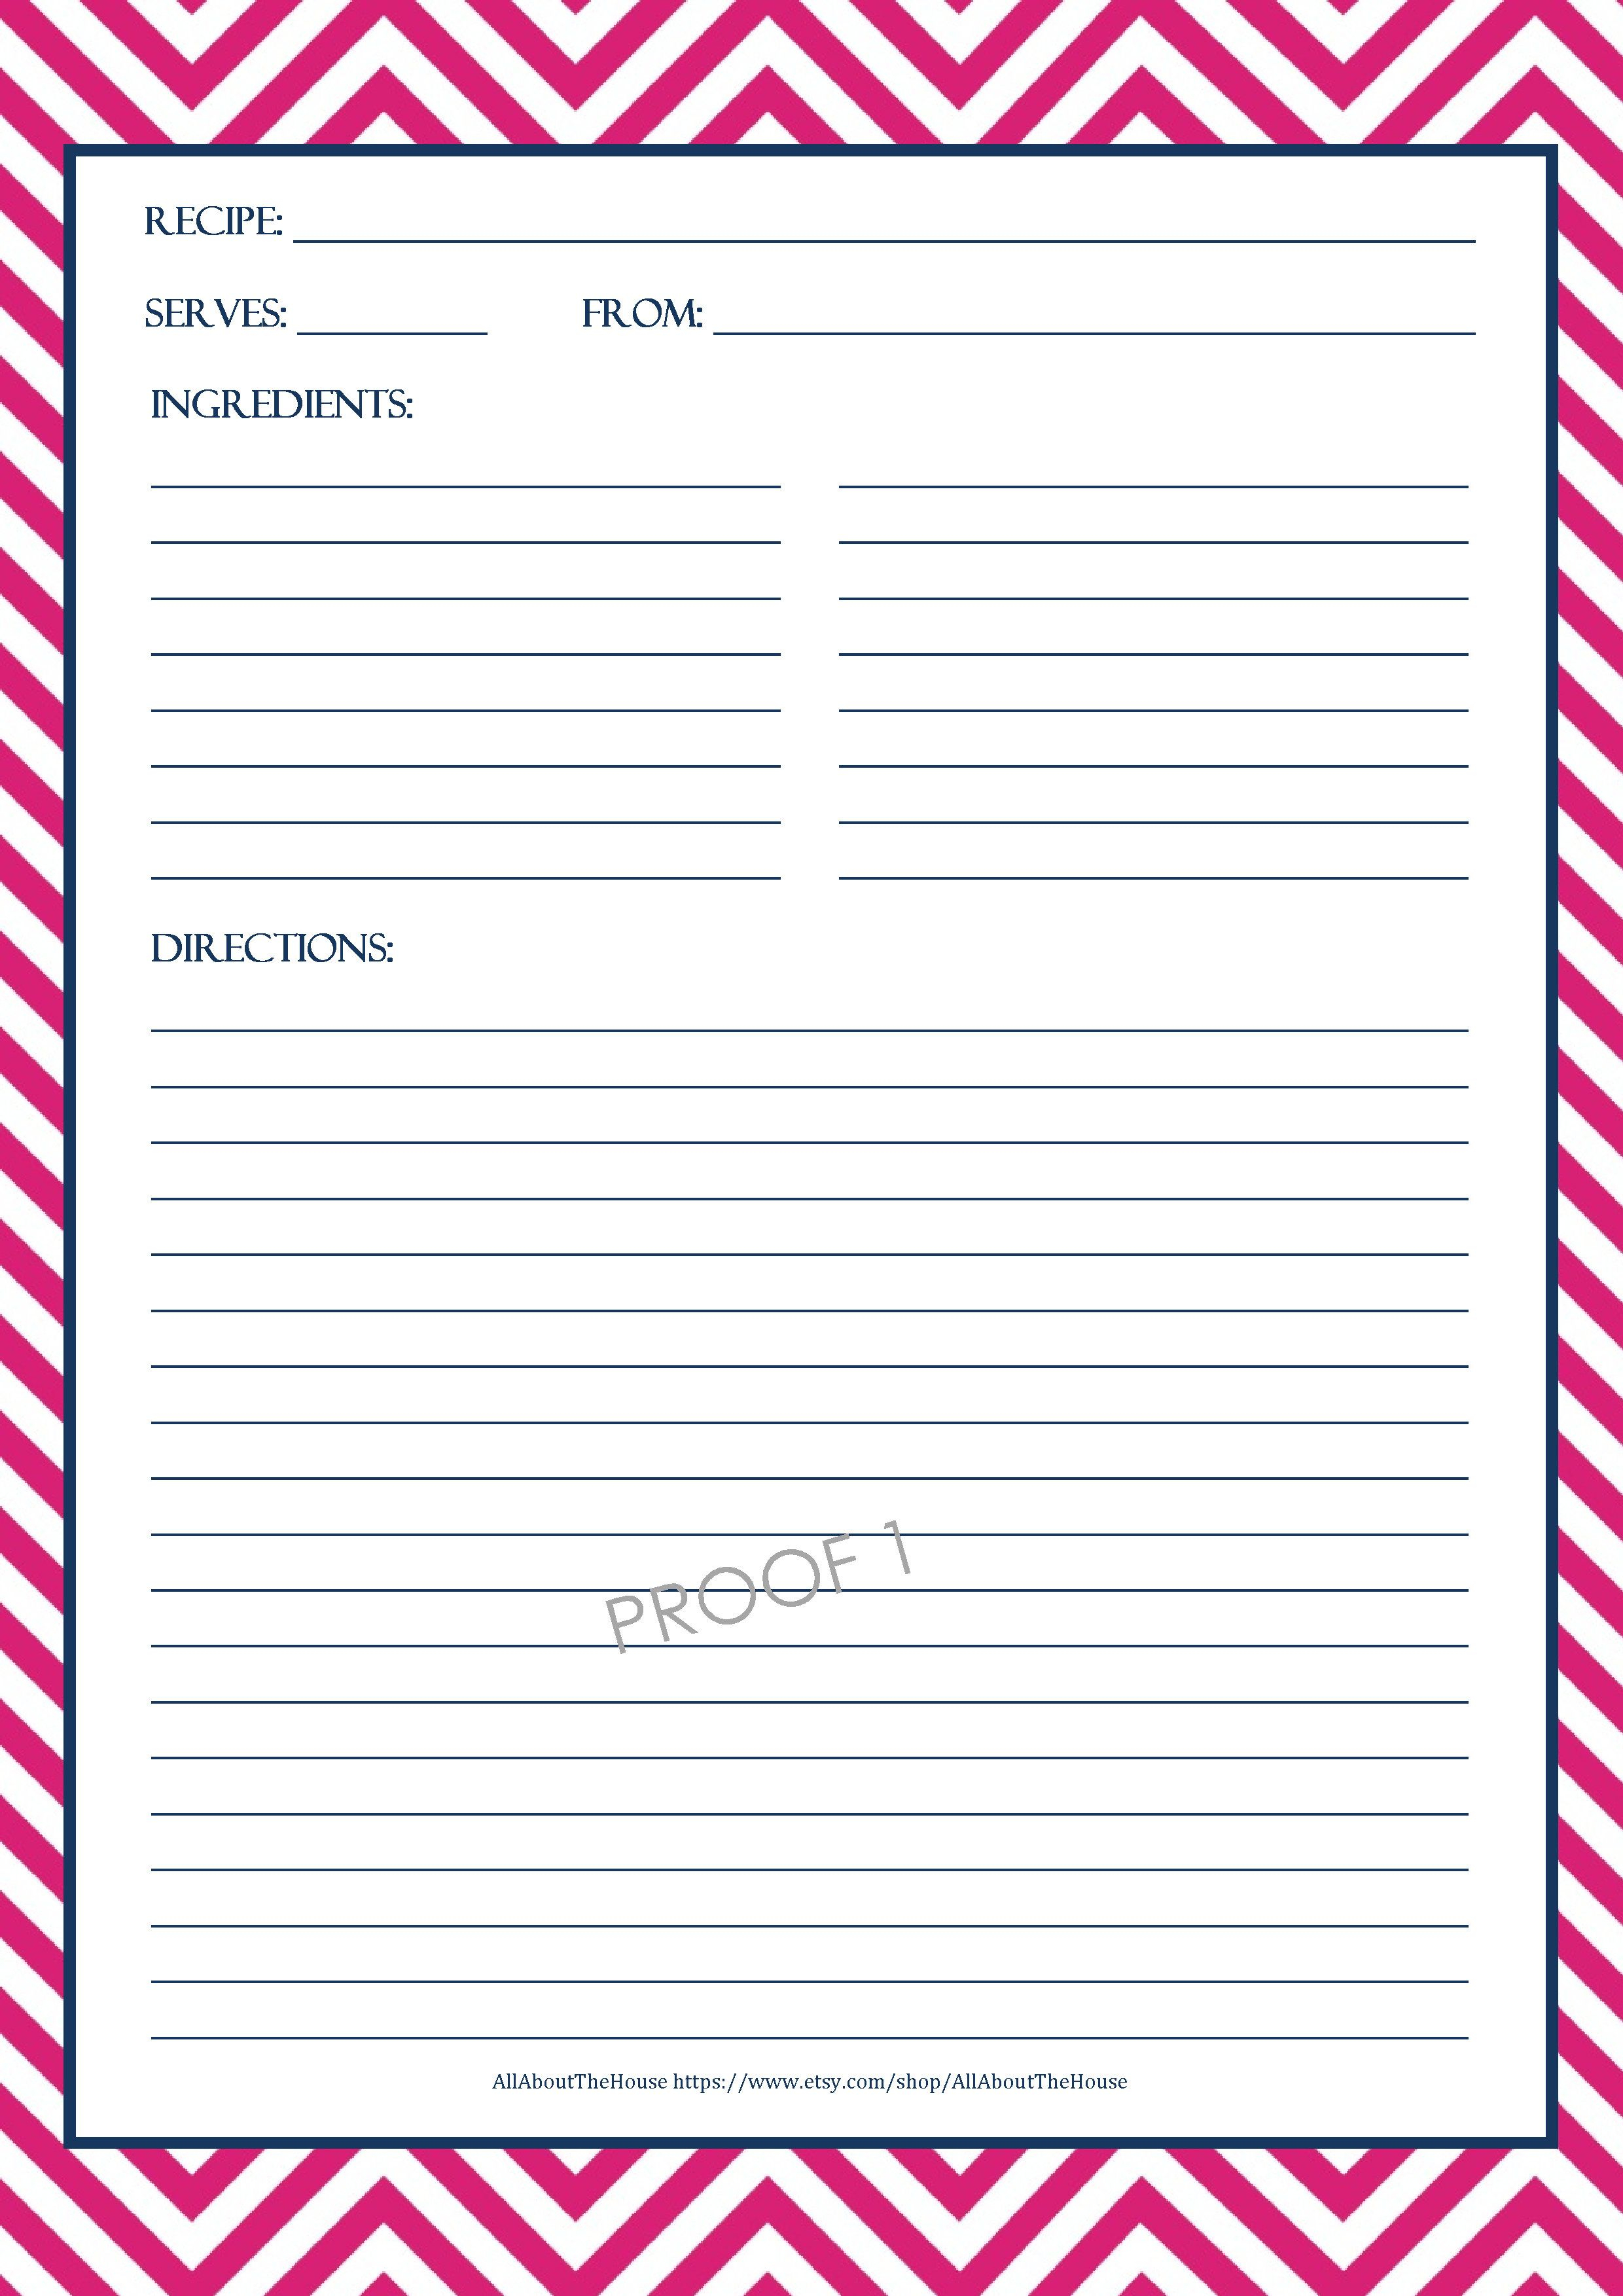 Chevron Recipe Sheet Editable | School Binder Wallpaper Throughout Full Page Recipe Template For Word